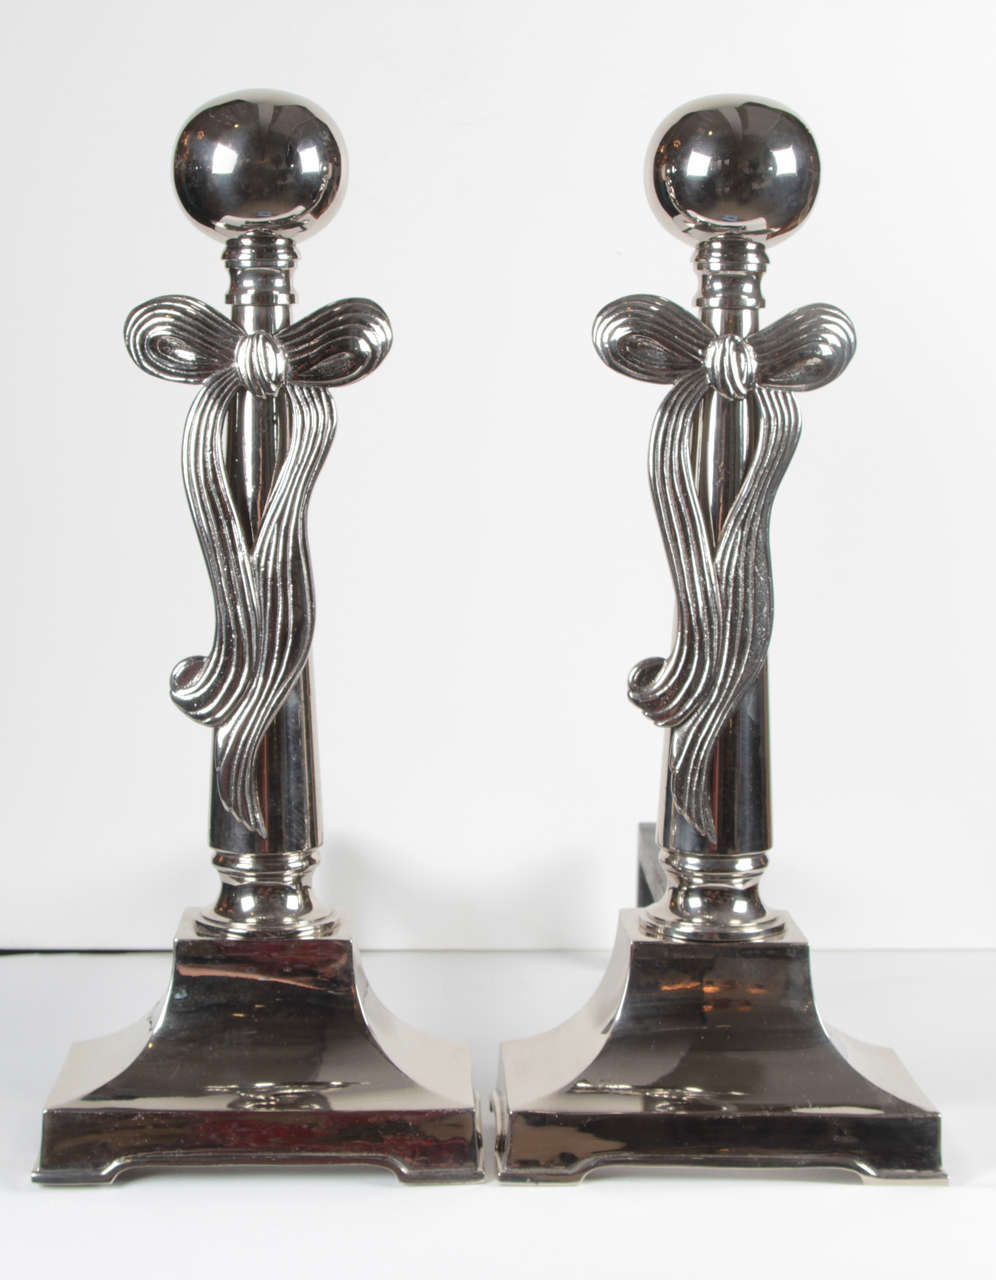 Fantastic pair of Art Deco andirons in polished nickel with cannon ball finial and stylized bow.